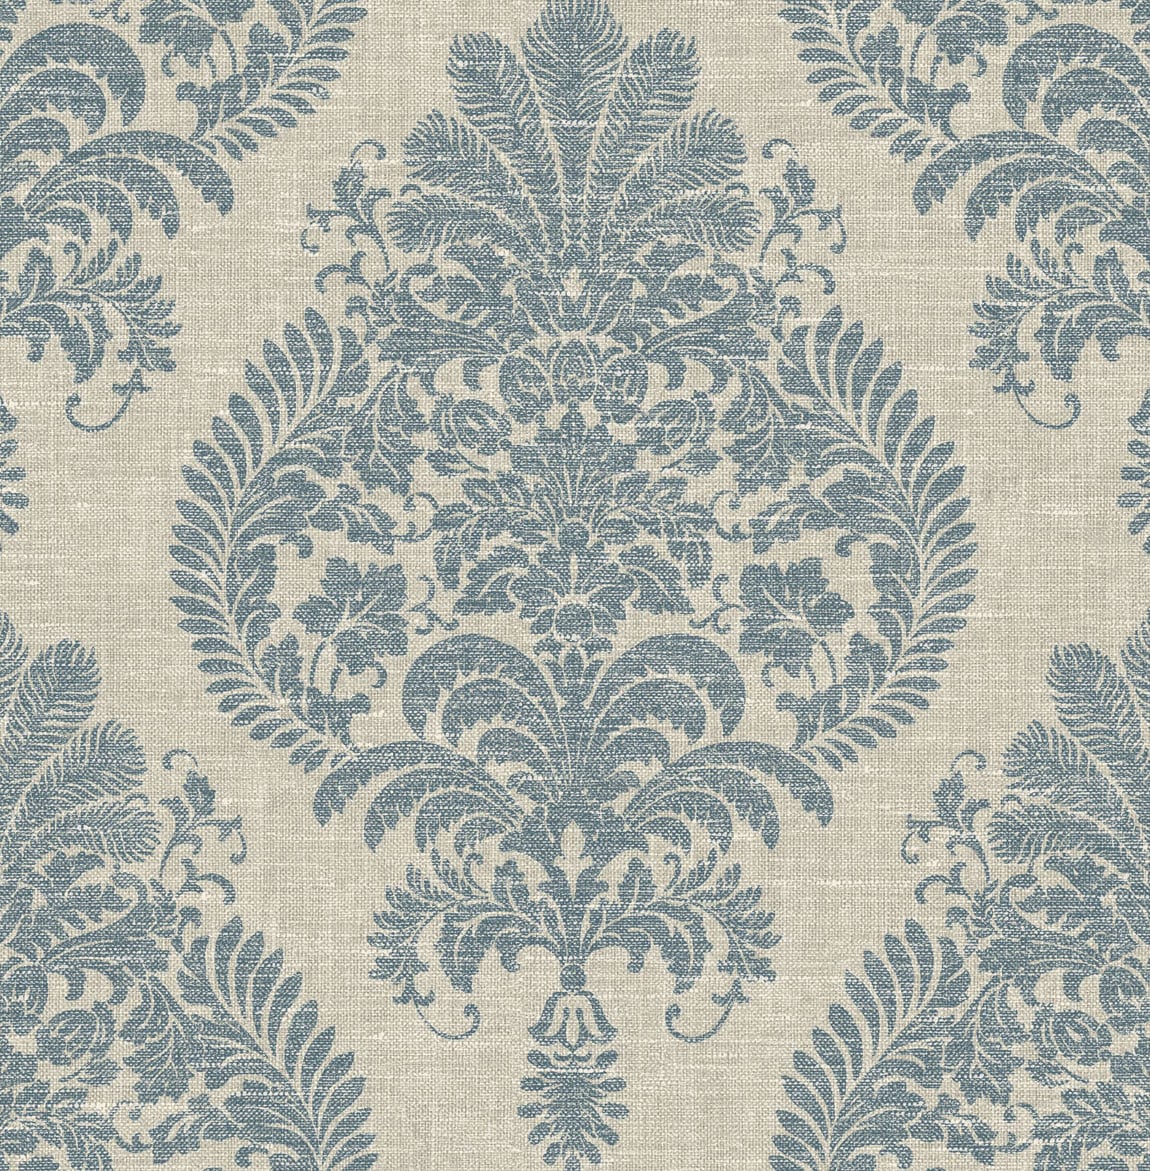 Lillian August LN10402 Luxe Retreat Antigua Damask  Wallpaper Air Force Blue and Alabaster